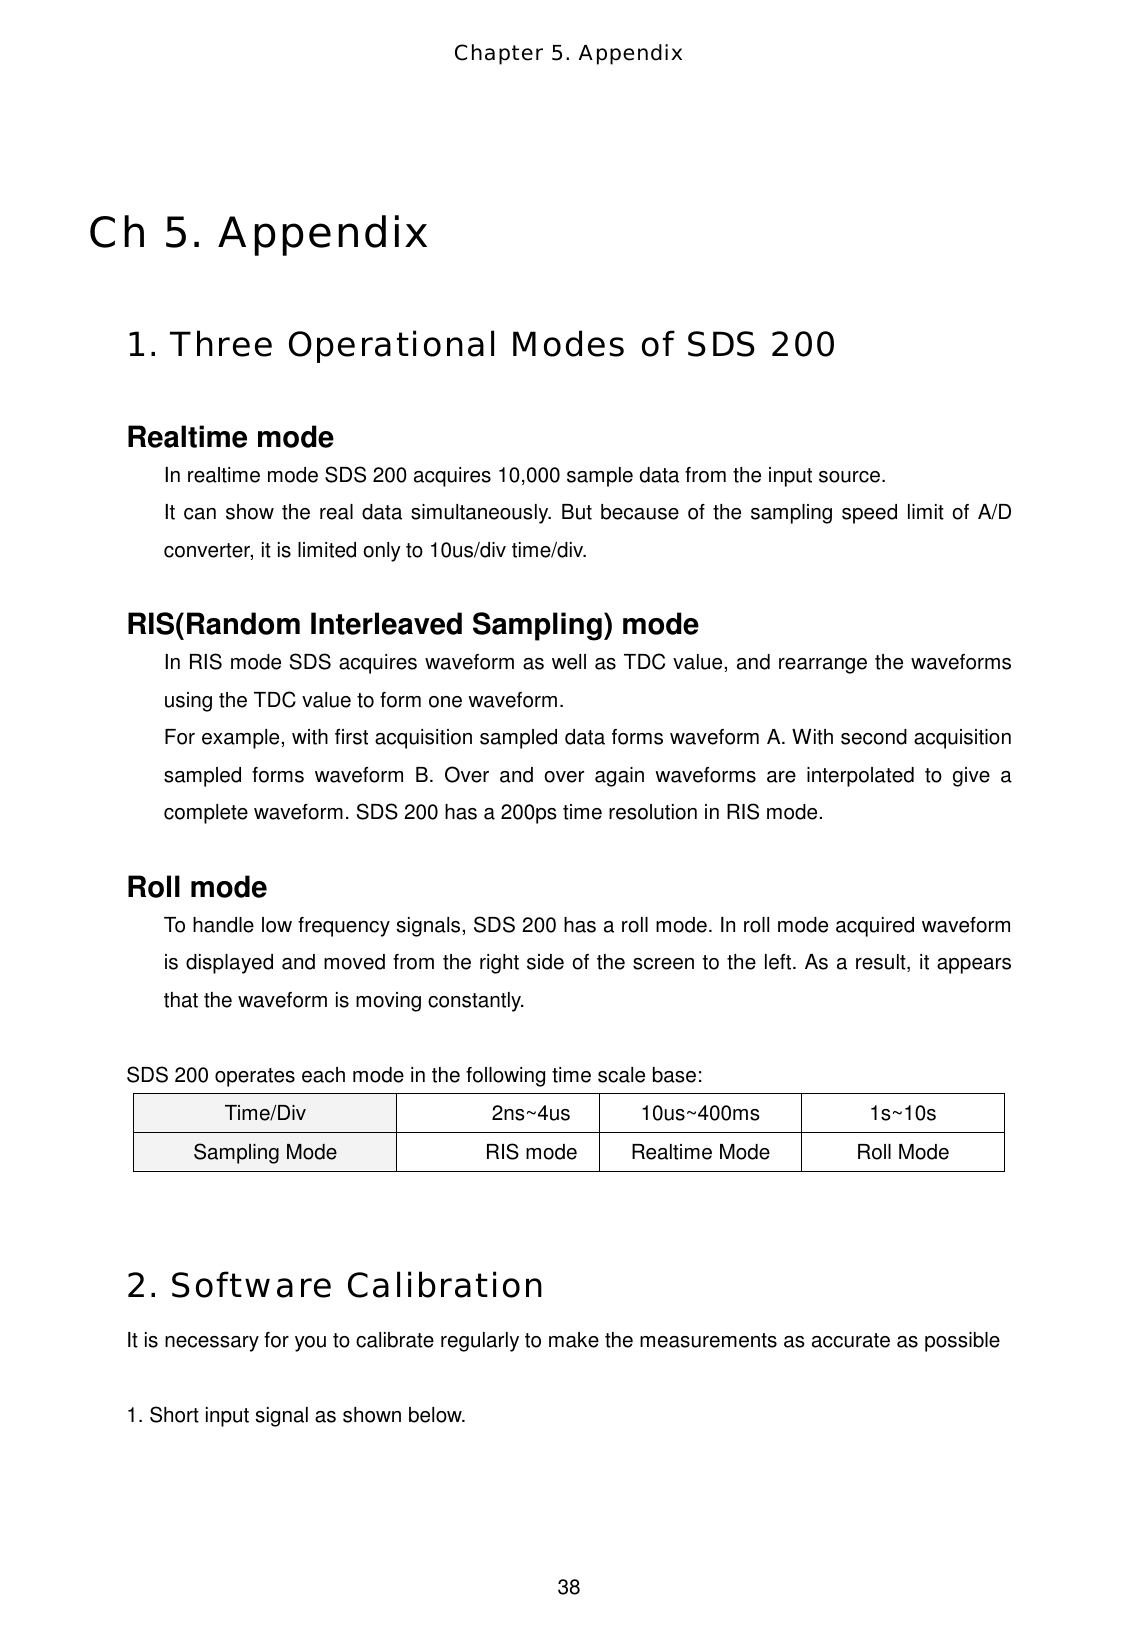 Chapter 5. Appendix  38 Ch 5. Appendix  1. Three Operational Modes of SDS 200  Realtime mode In realtime mode SDS 200 acquires 10,000 sample data from the input source.   It can show the real data simultaneously. But because of the sampling speed limit of A/D converter, it is limited only to 10us/div time/div.    RIS(Random Interleaved Sampling) mode In RIS mode SDS acquires waveform as well as TDC value, and rearrange the waveforms using the TDC value to form one waveform.   For example, with first acquisition sampled data forms waveform A. With second acquisition sampled forms waveform B. Over and over again waveforms are interpolated to give a complete waveform. SDS 200 has a 200ps time resolution in RIS mode.    Roll mode To handle low frequency signals, SDS 200 has a roll mode. In roll mode acquired waveform is displayed and moved from the right side of the screen to the left. As a result, it appears that the waveform is moving constantly.  SDS 200 operates each mode in the following time scale base: Time/Div  2ns~4us 10us~400ms  1s~10s Sampling Mode  RIS mode  Realtime Mode  Roll Mode   2. Software Calibration  It is necessary for you to calibrate regularly to make the measurements as accurate as possible  1. Short input signal as shown below. 